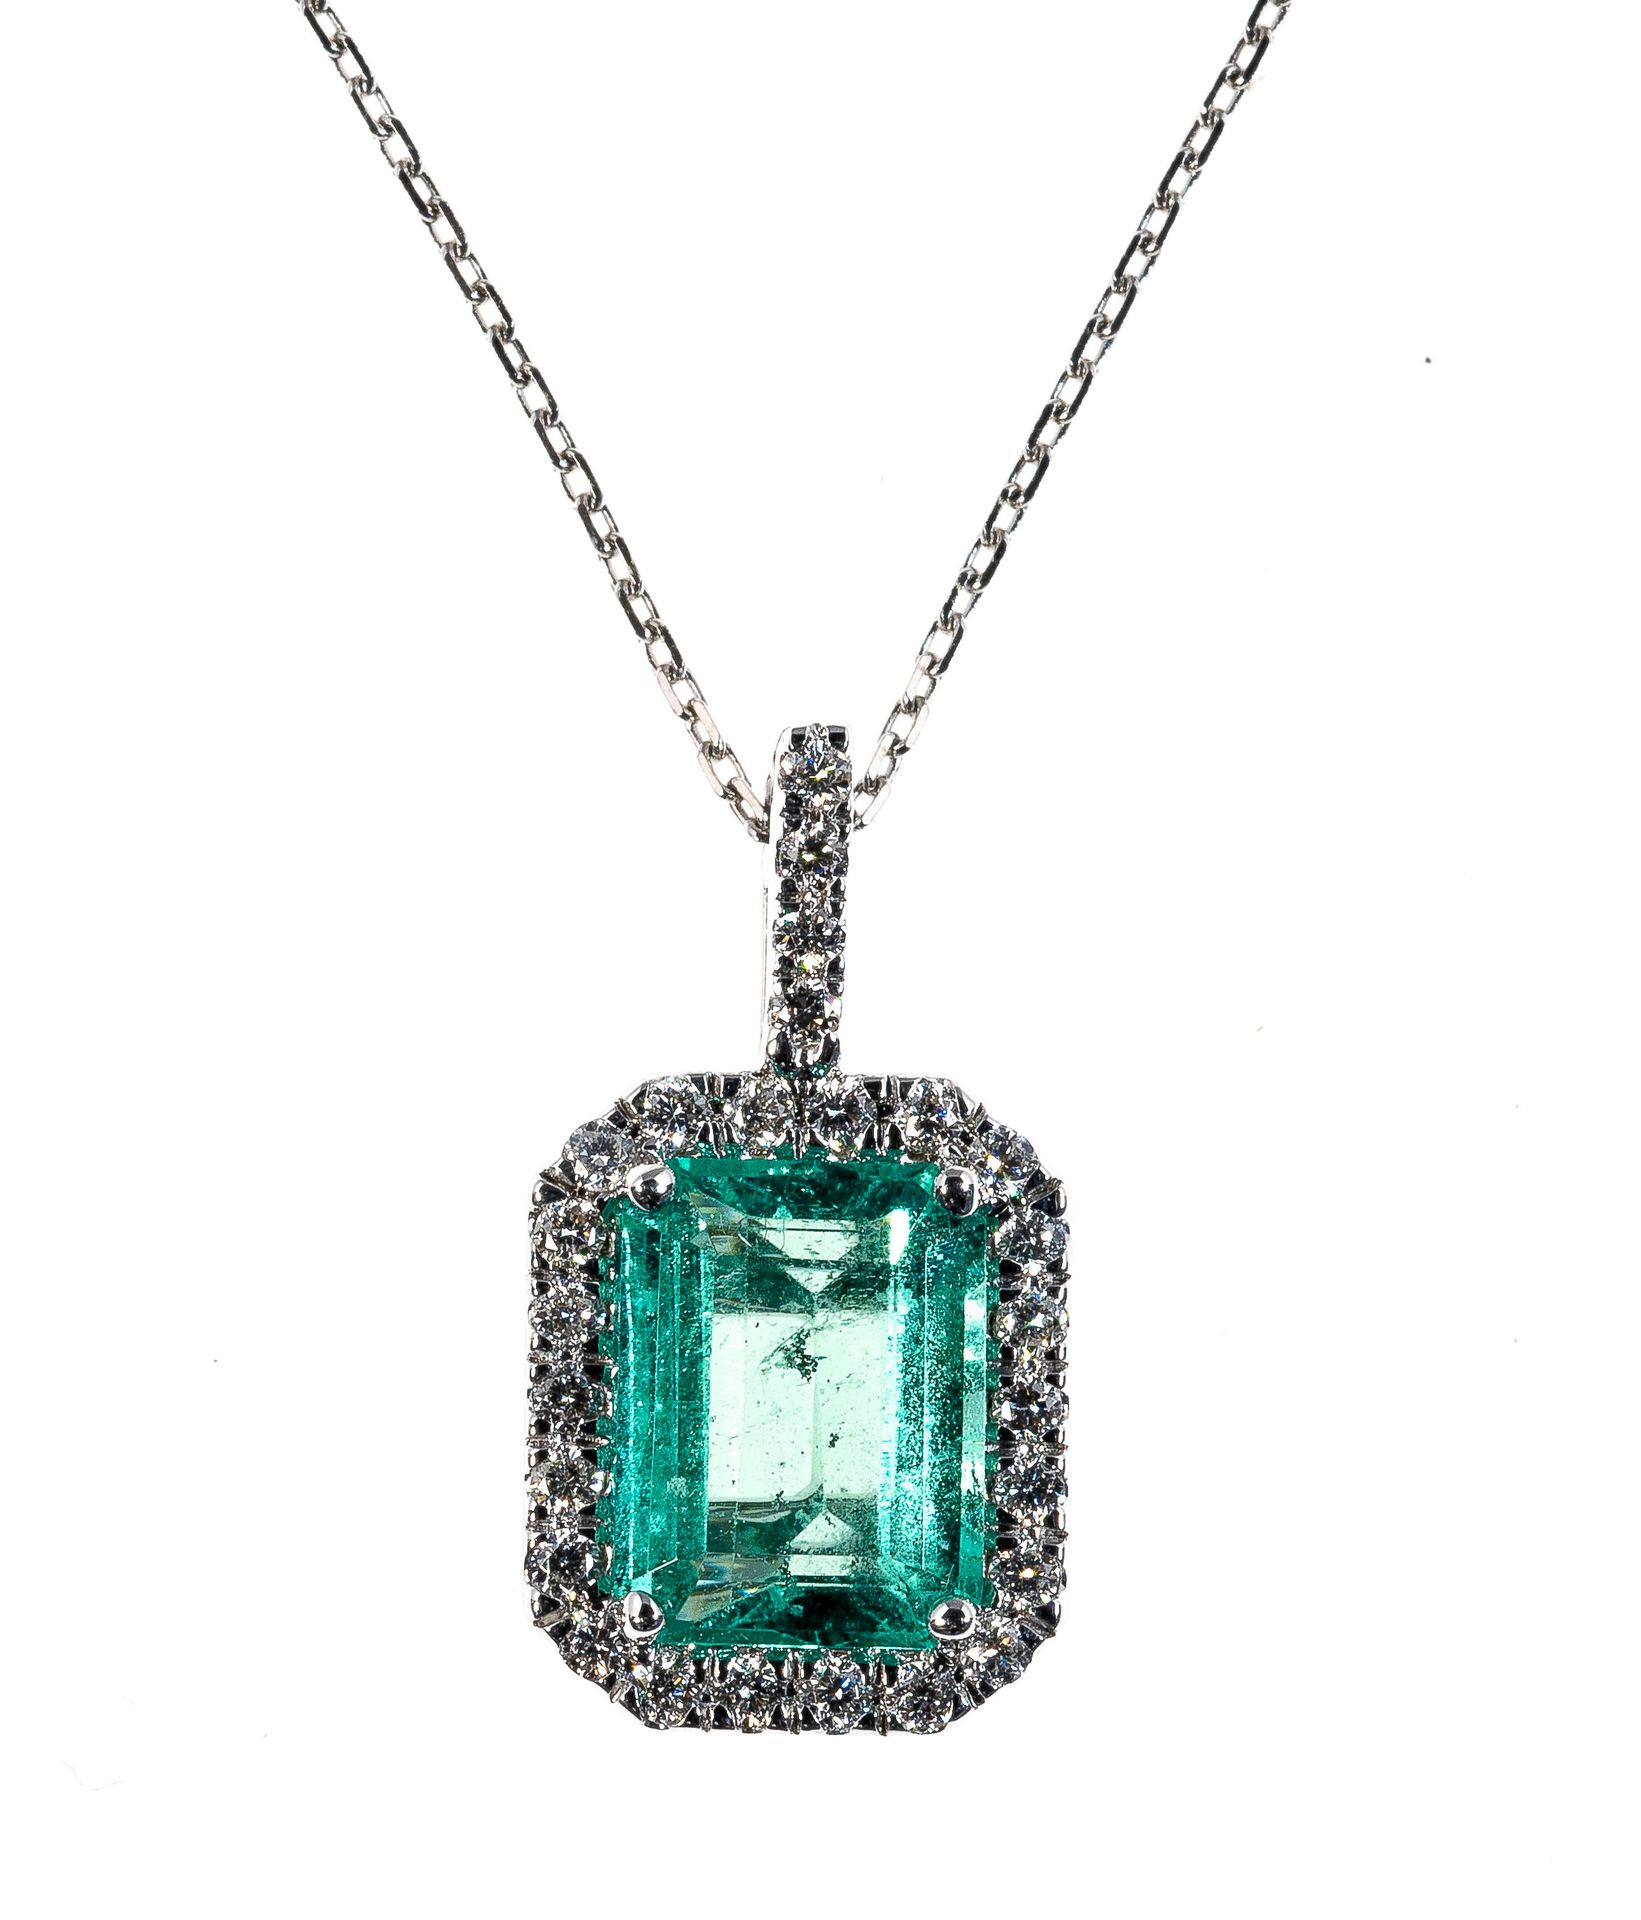 Null White gold chain and pendant with a 1.25 carat emerald in a diamond setting&hellip;